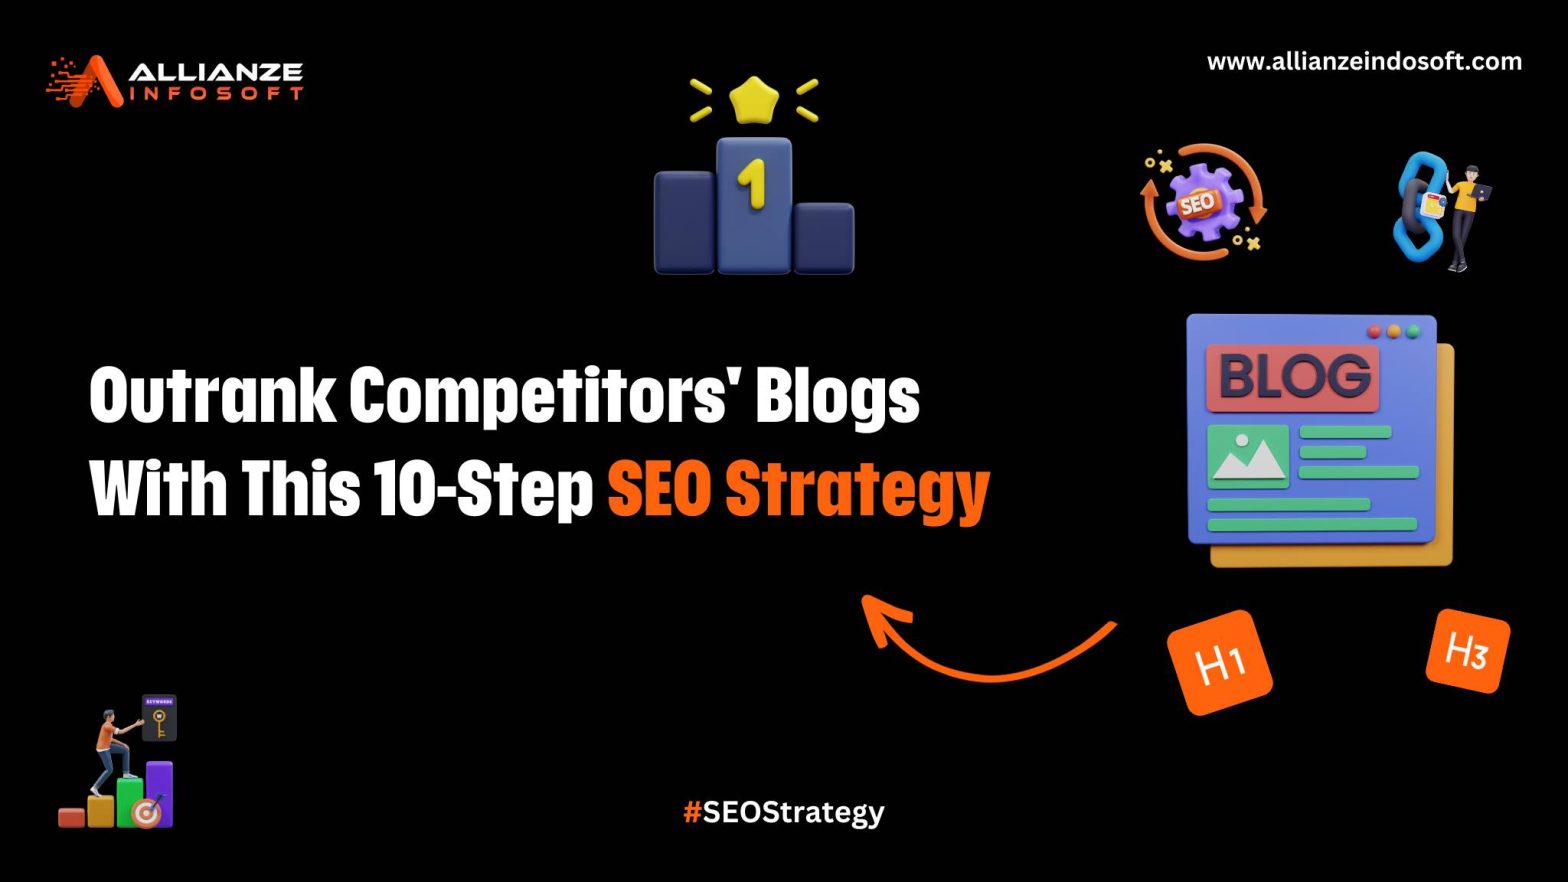 Outrank Competitors' Blogs With This 10-Step SEO Strategy